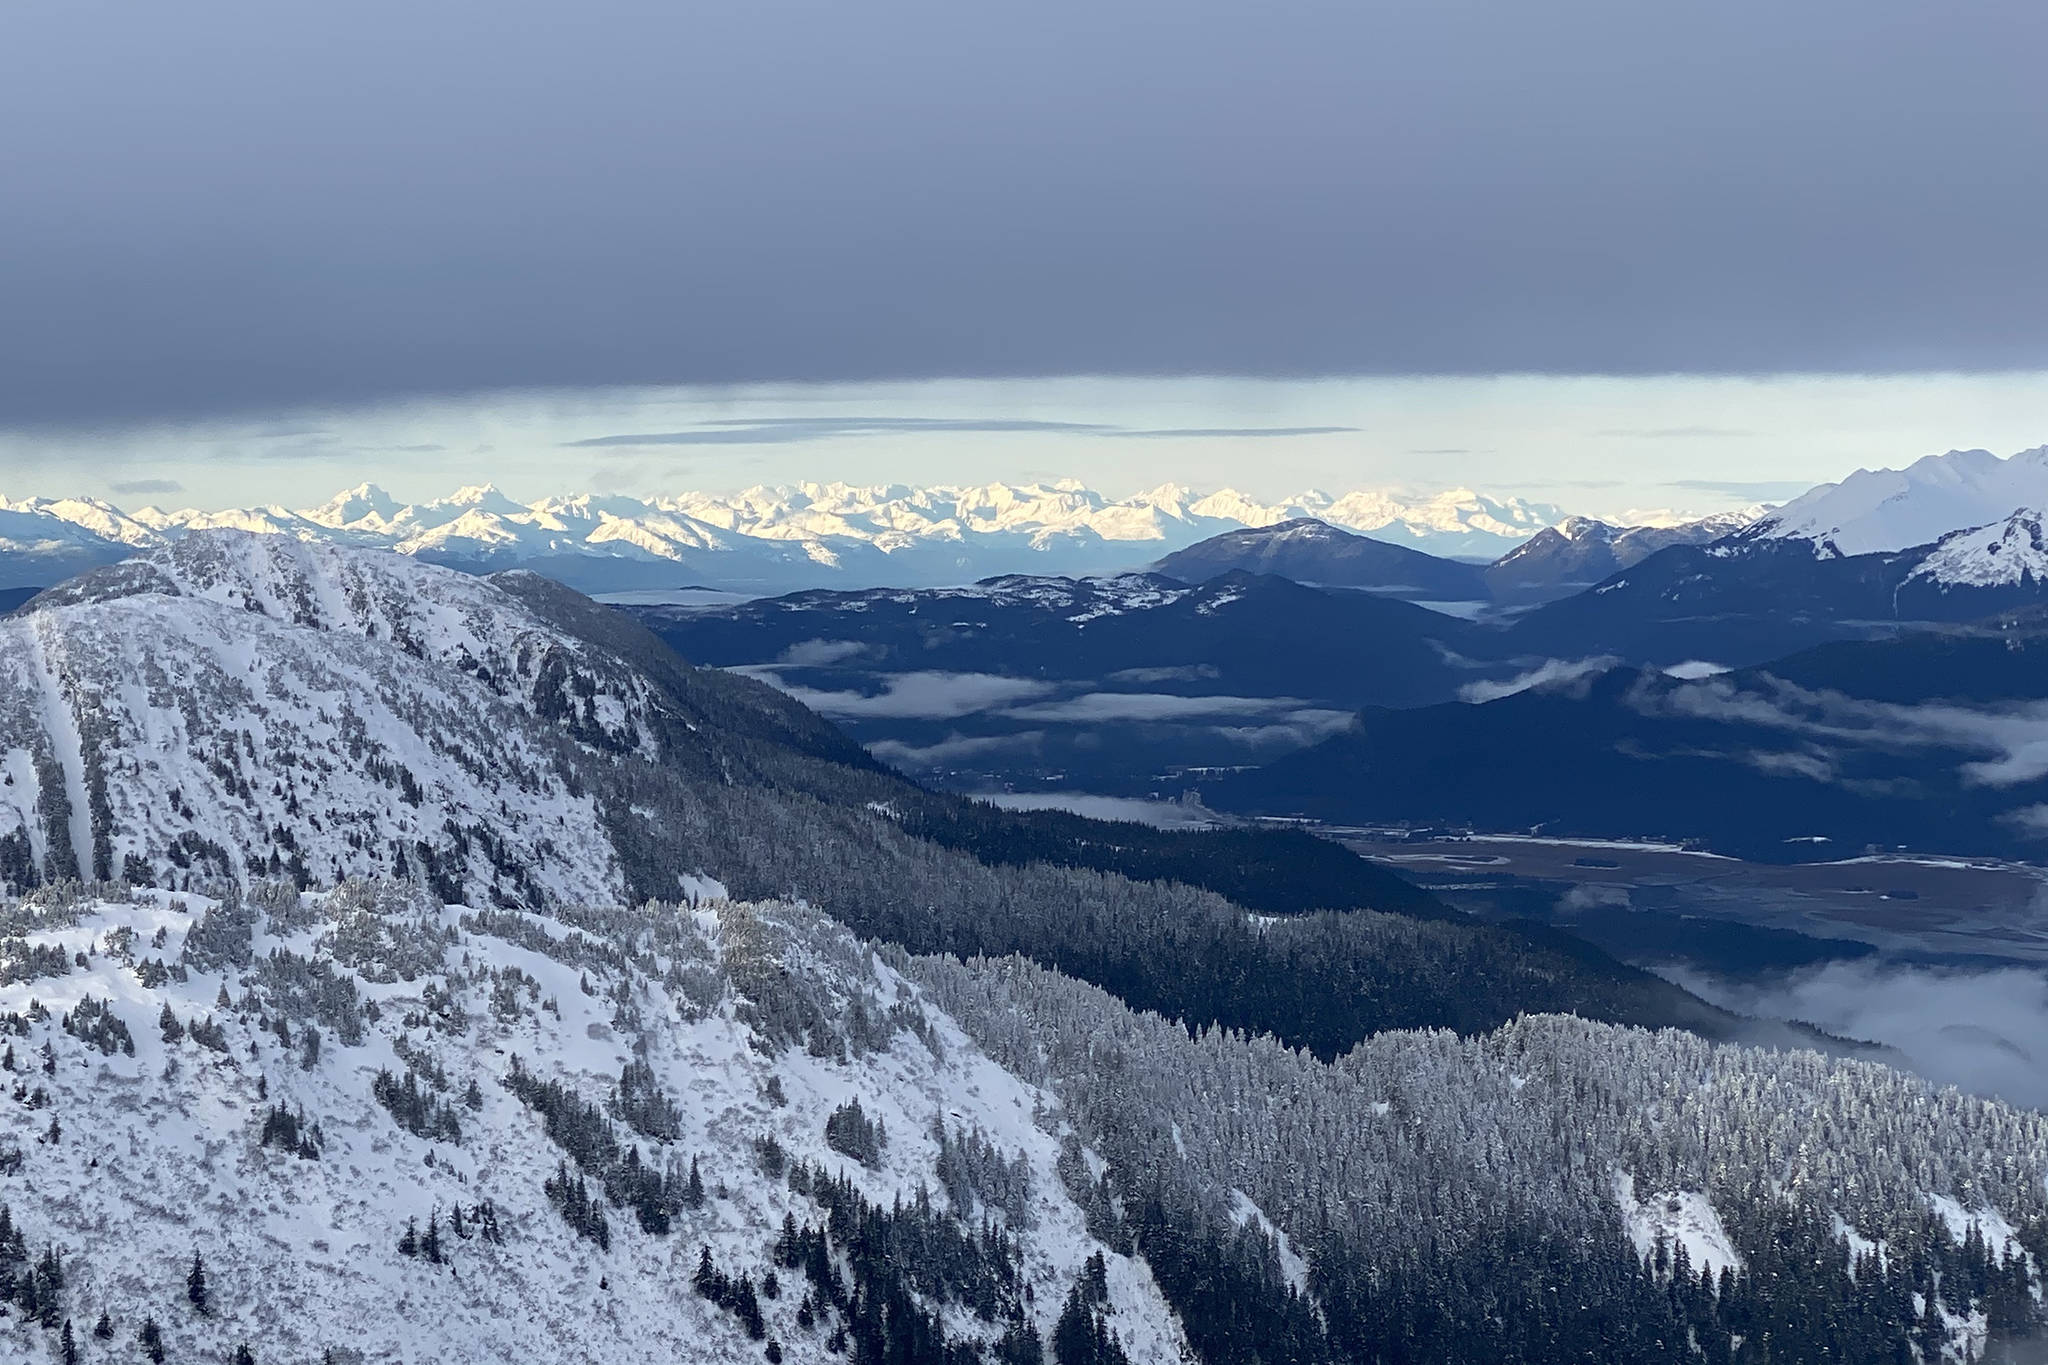 The Chilkat Mountains glow brightly in the distance as seen from the summit of Jumbo on Nov. 24. (Courtesy Photo / Robert Sauerteig)